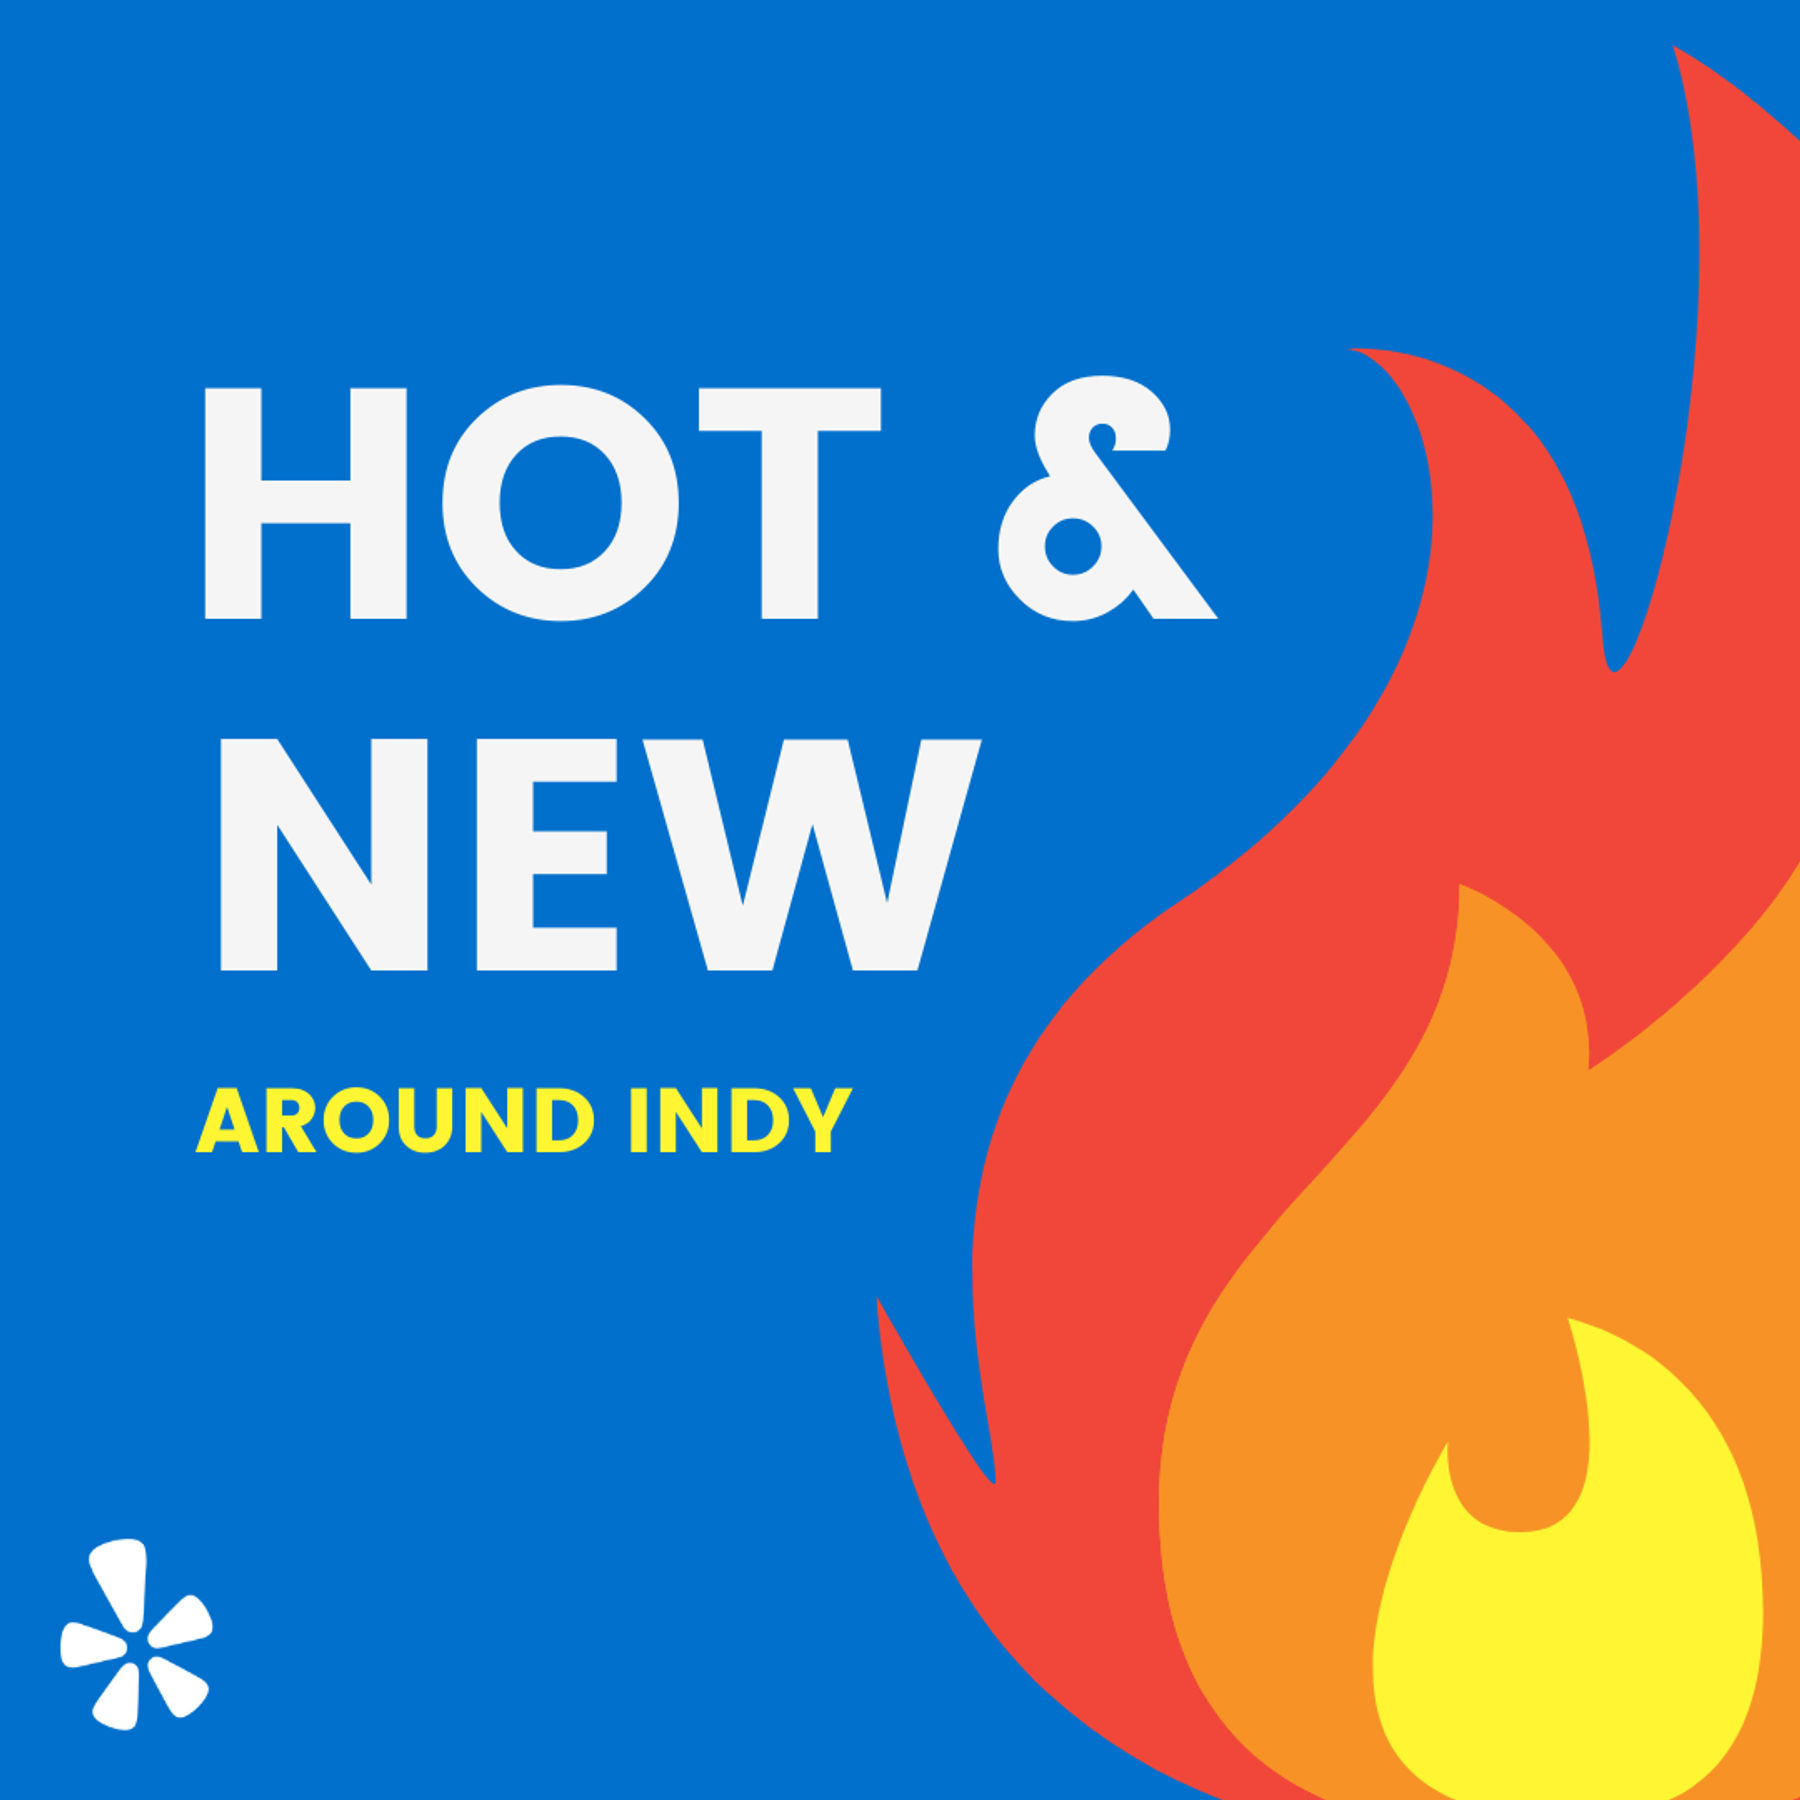 Hot & New Around Indy Downtown Indianapolis